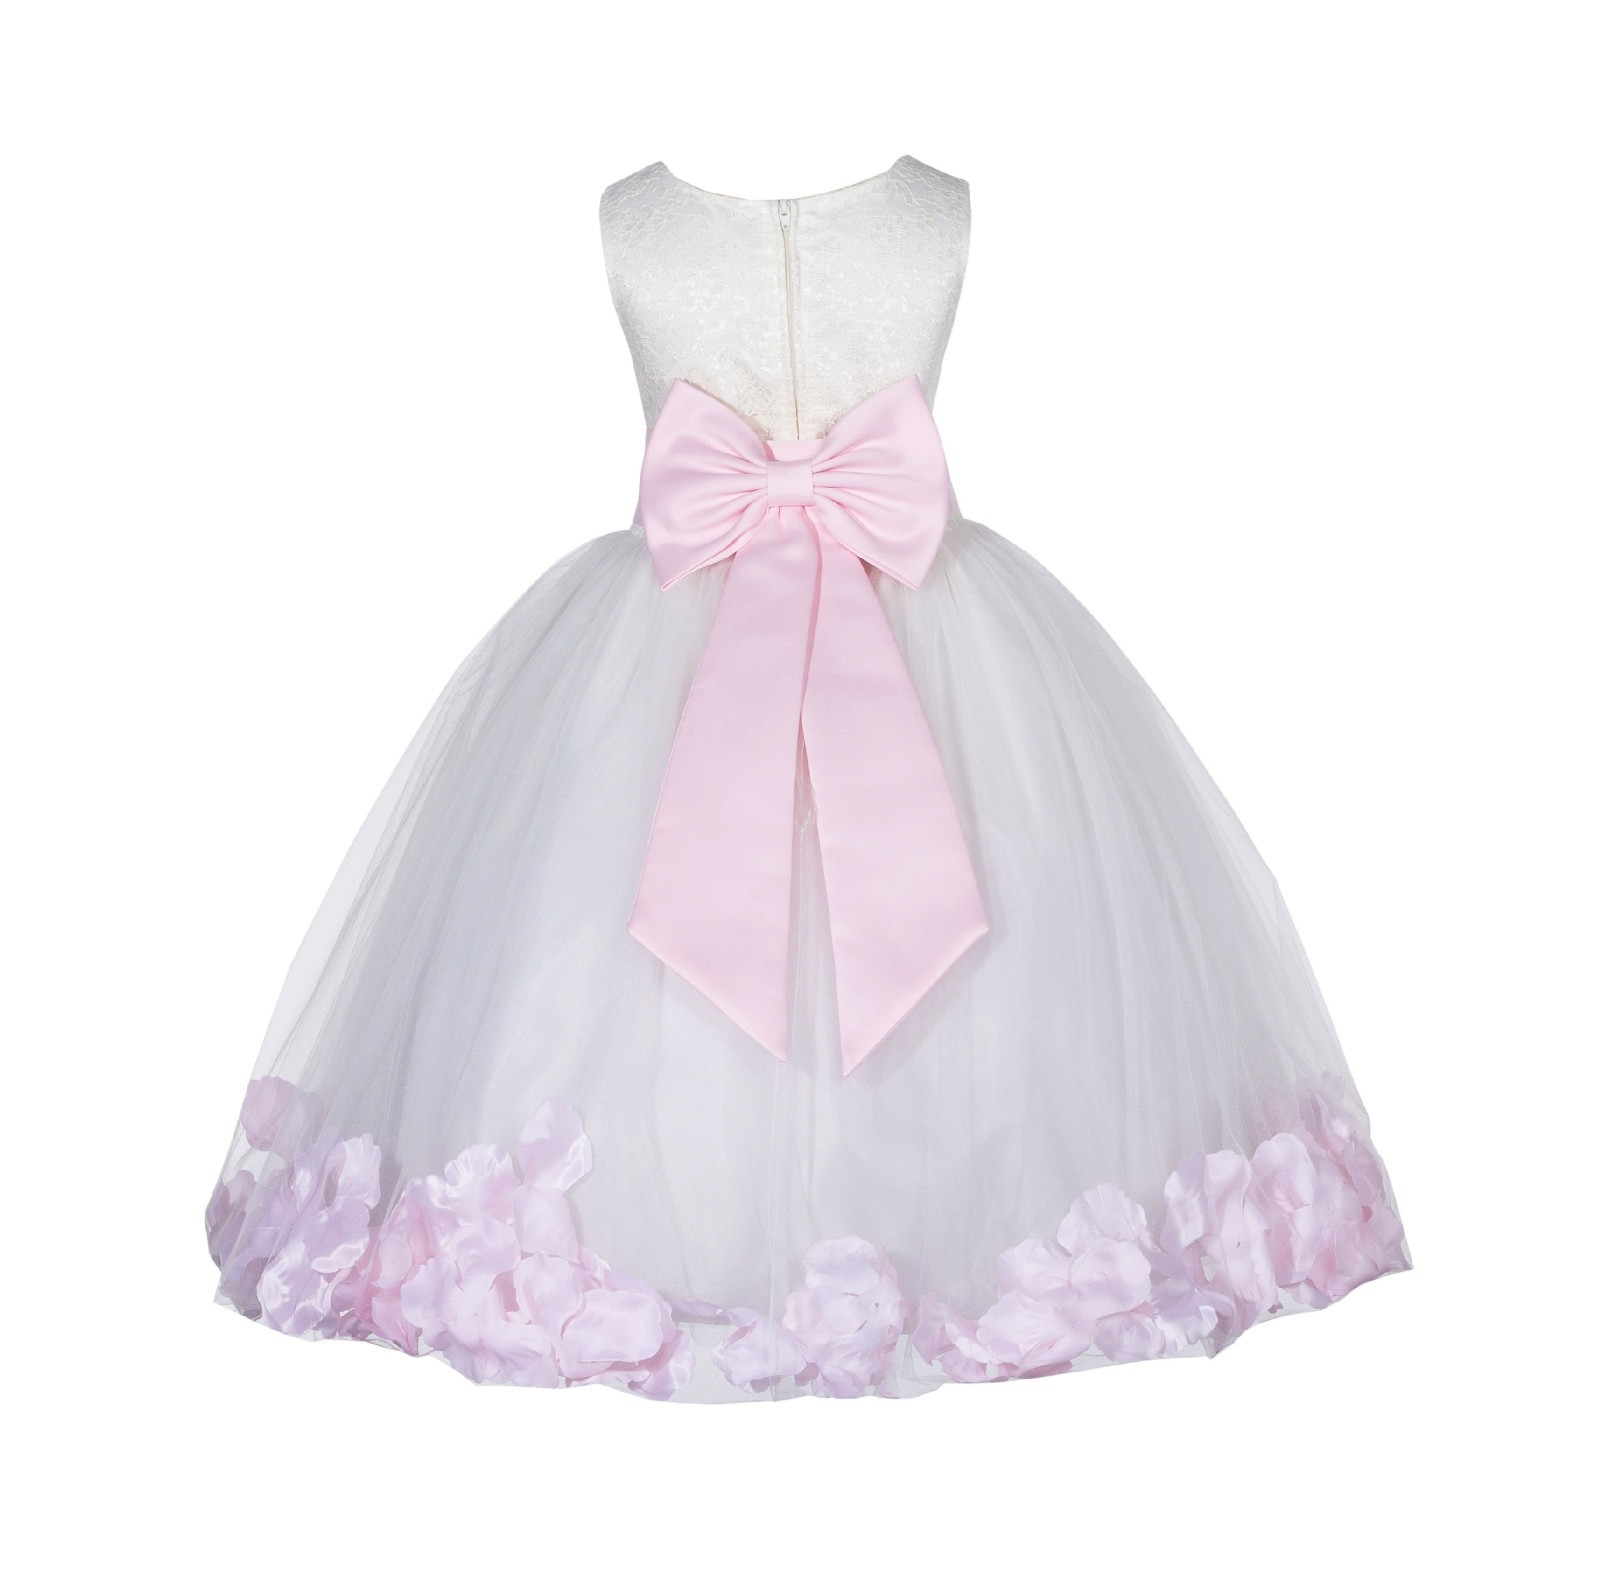 Ivory/Pink Lace Top Floral Petals Ivory Flower Girl Dress 165T